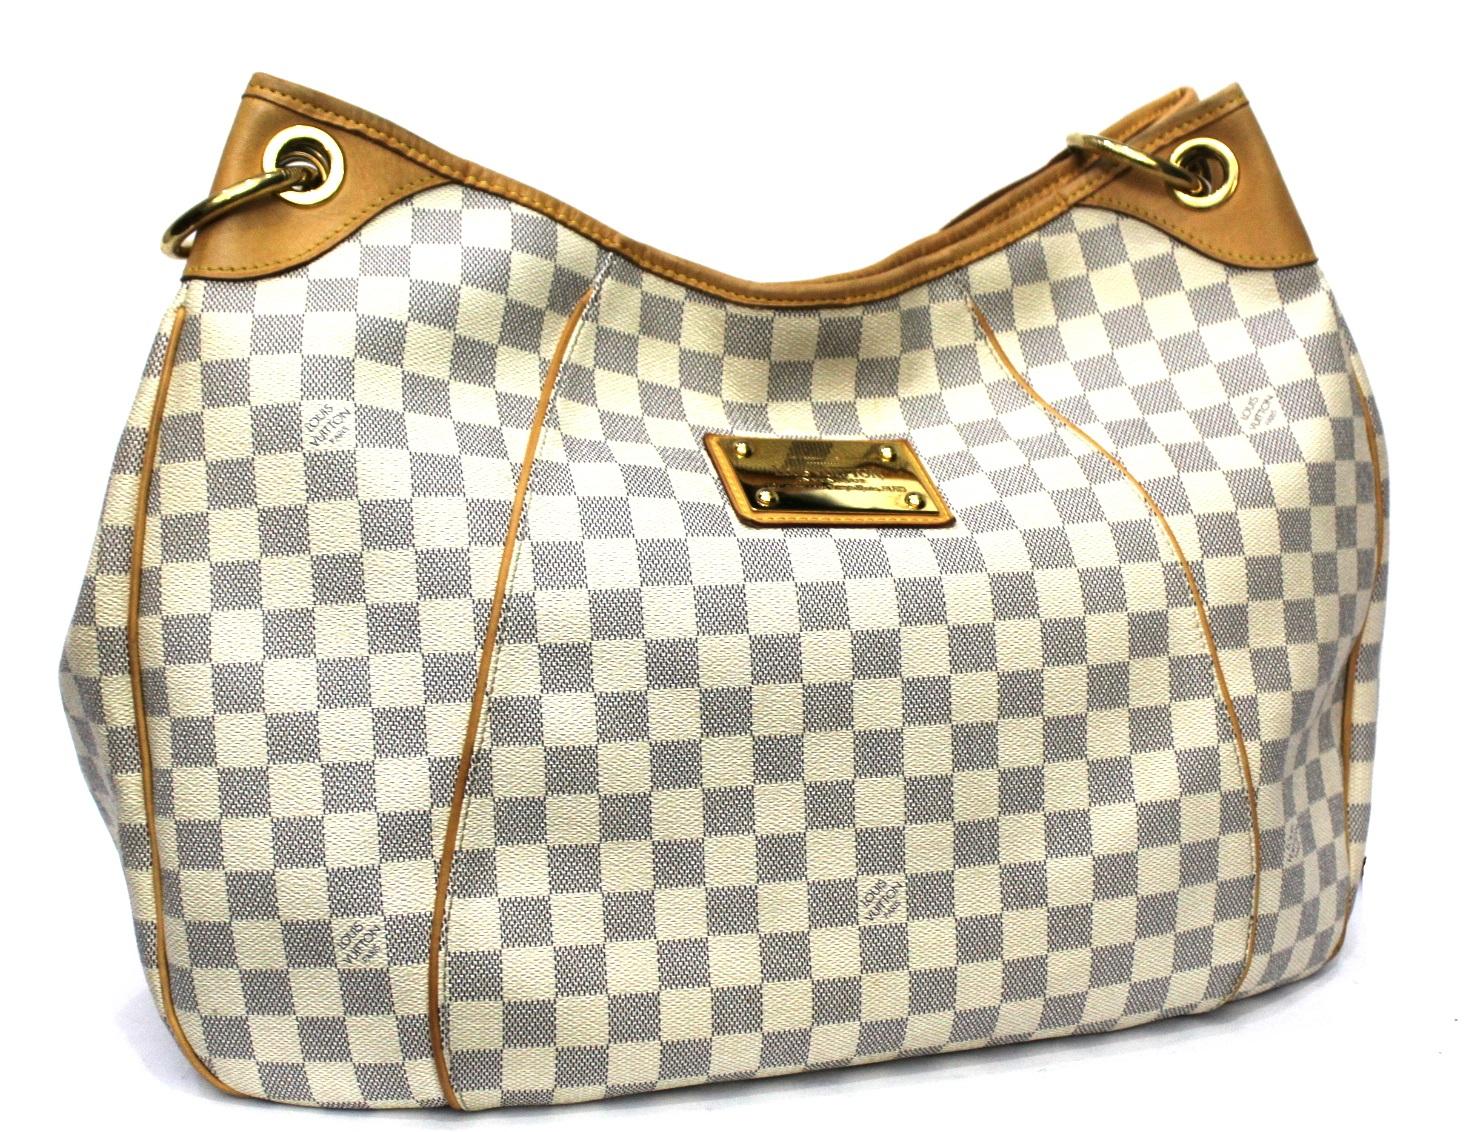 Louis Vuitton Galliera GM model made of Damier Azur canvas with cowhide details.

Cowhide handle, without large internal closure.

The bag is in excellent condition